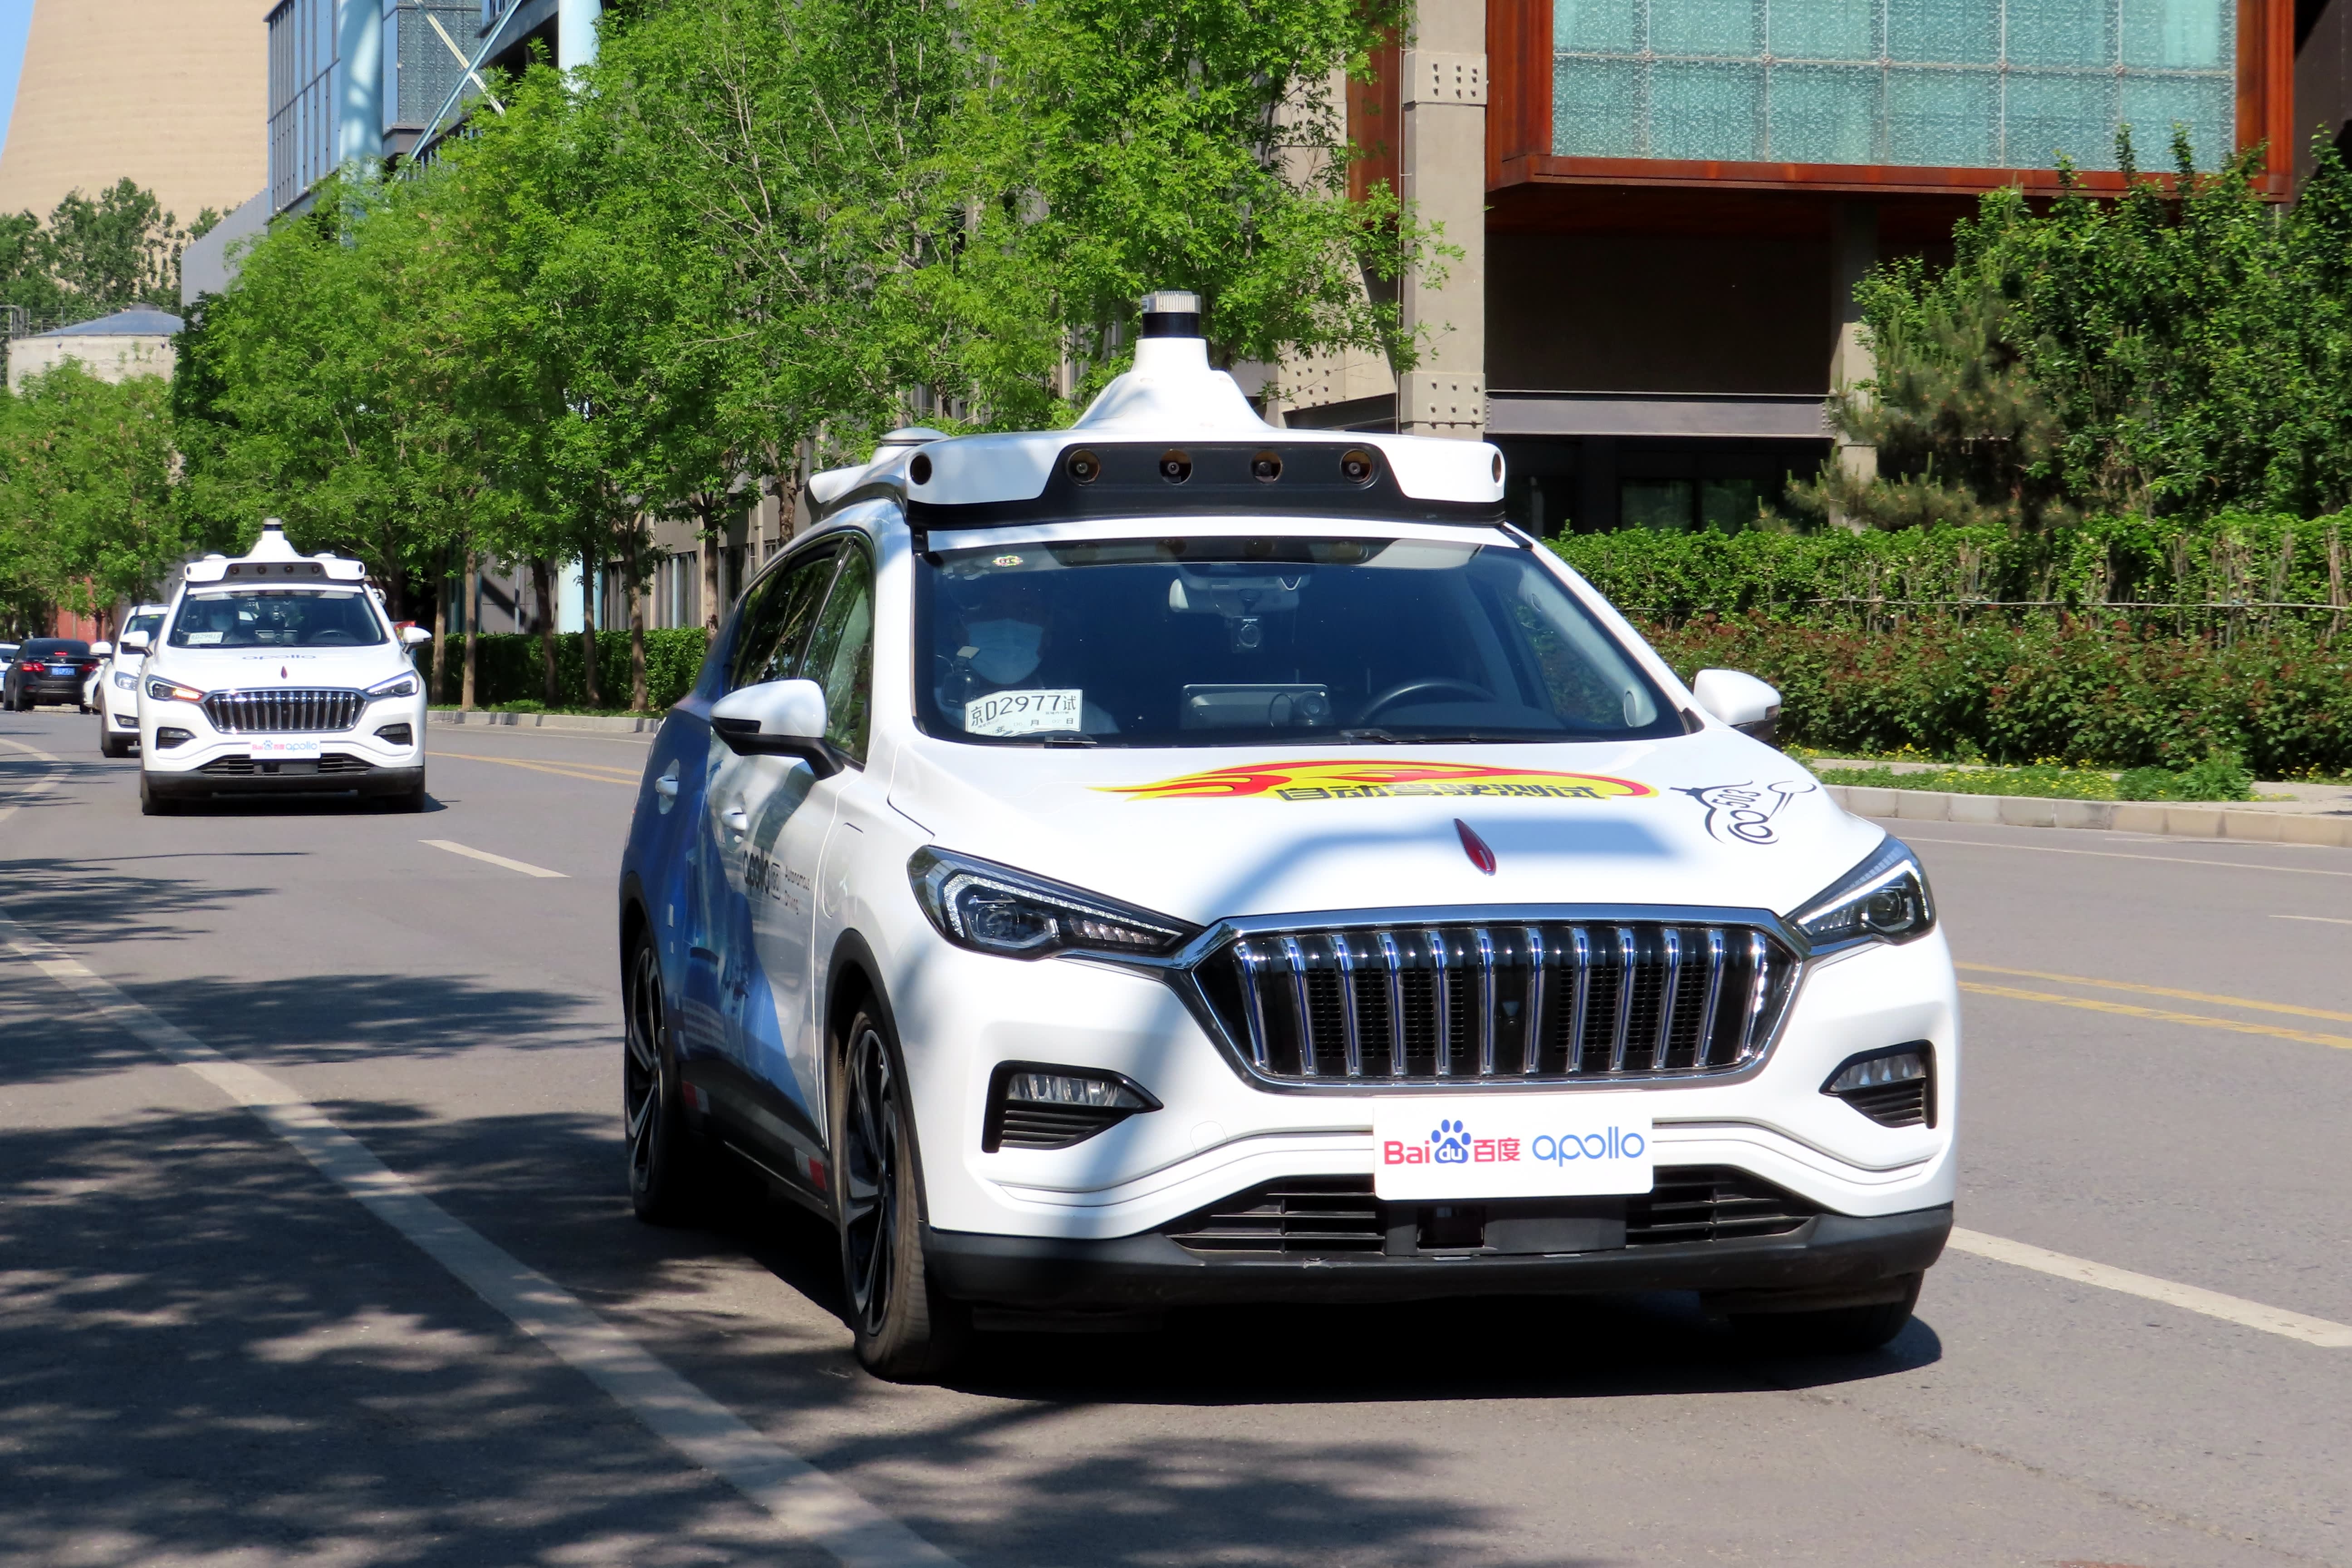 China’s Baidu wants to launch robotaxi service in 100 cities by 2030